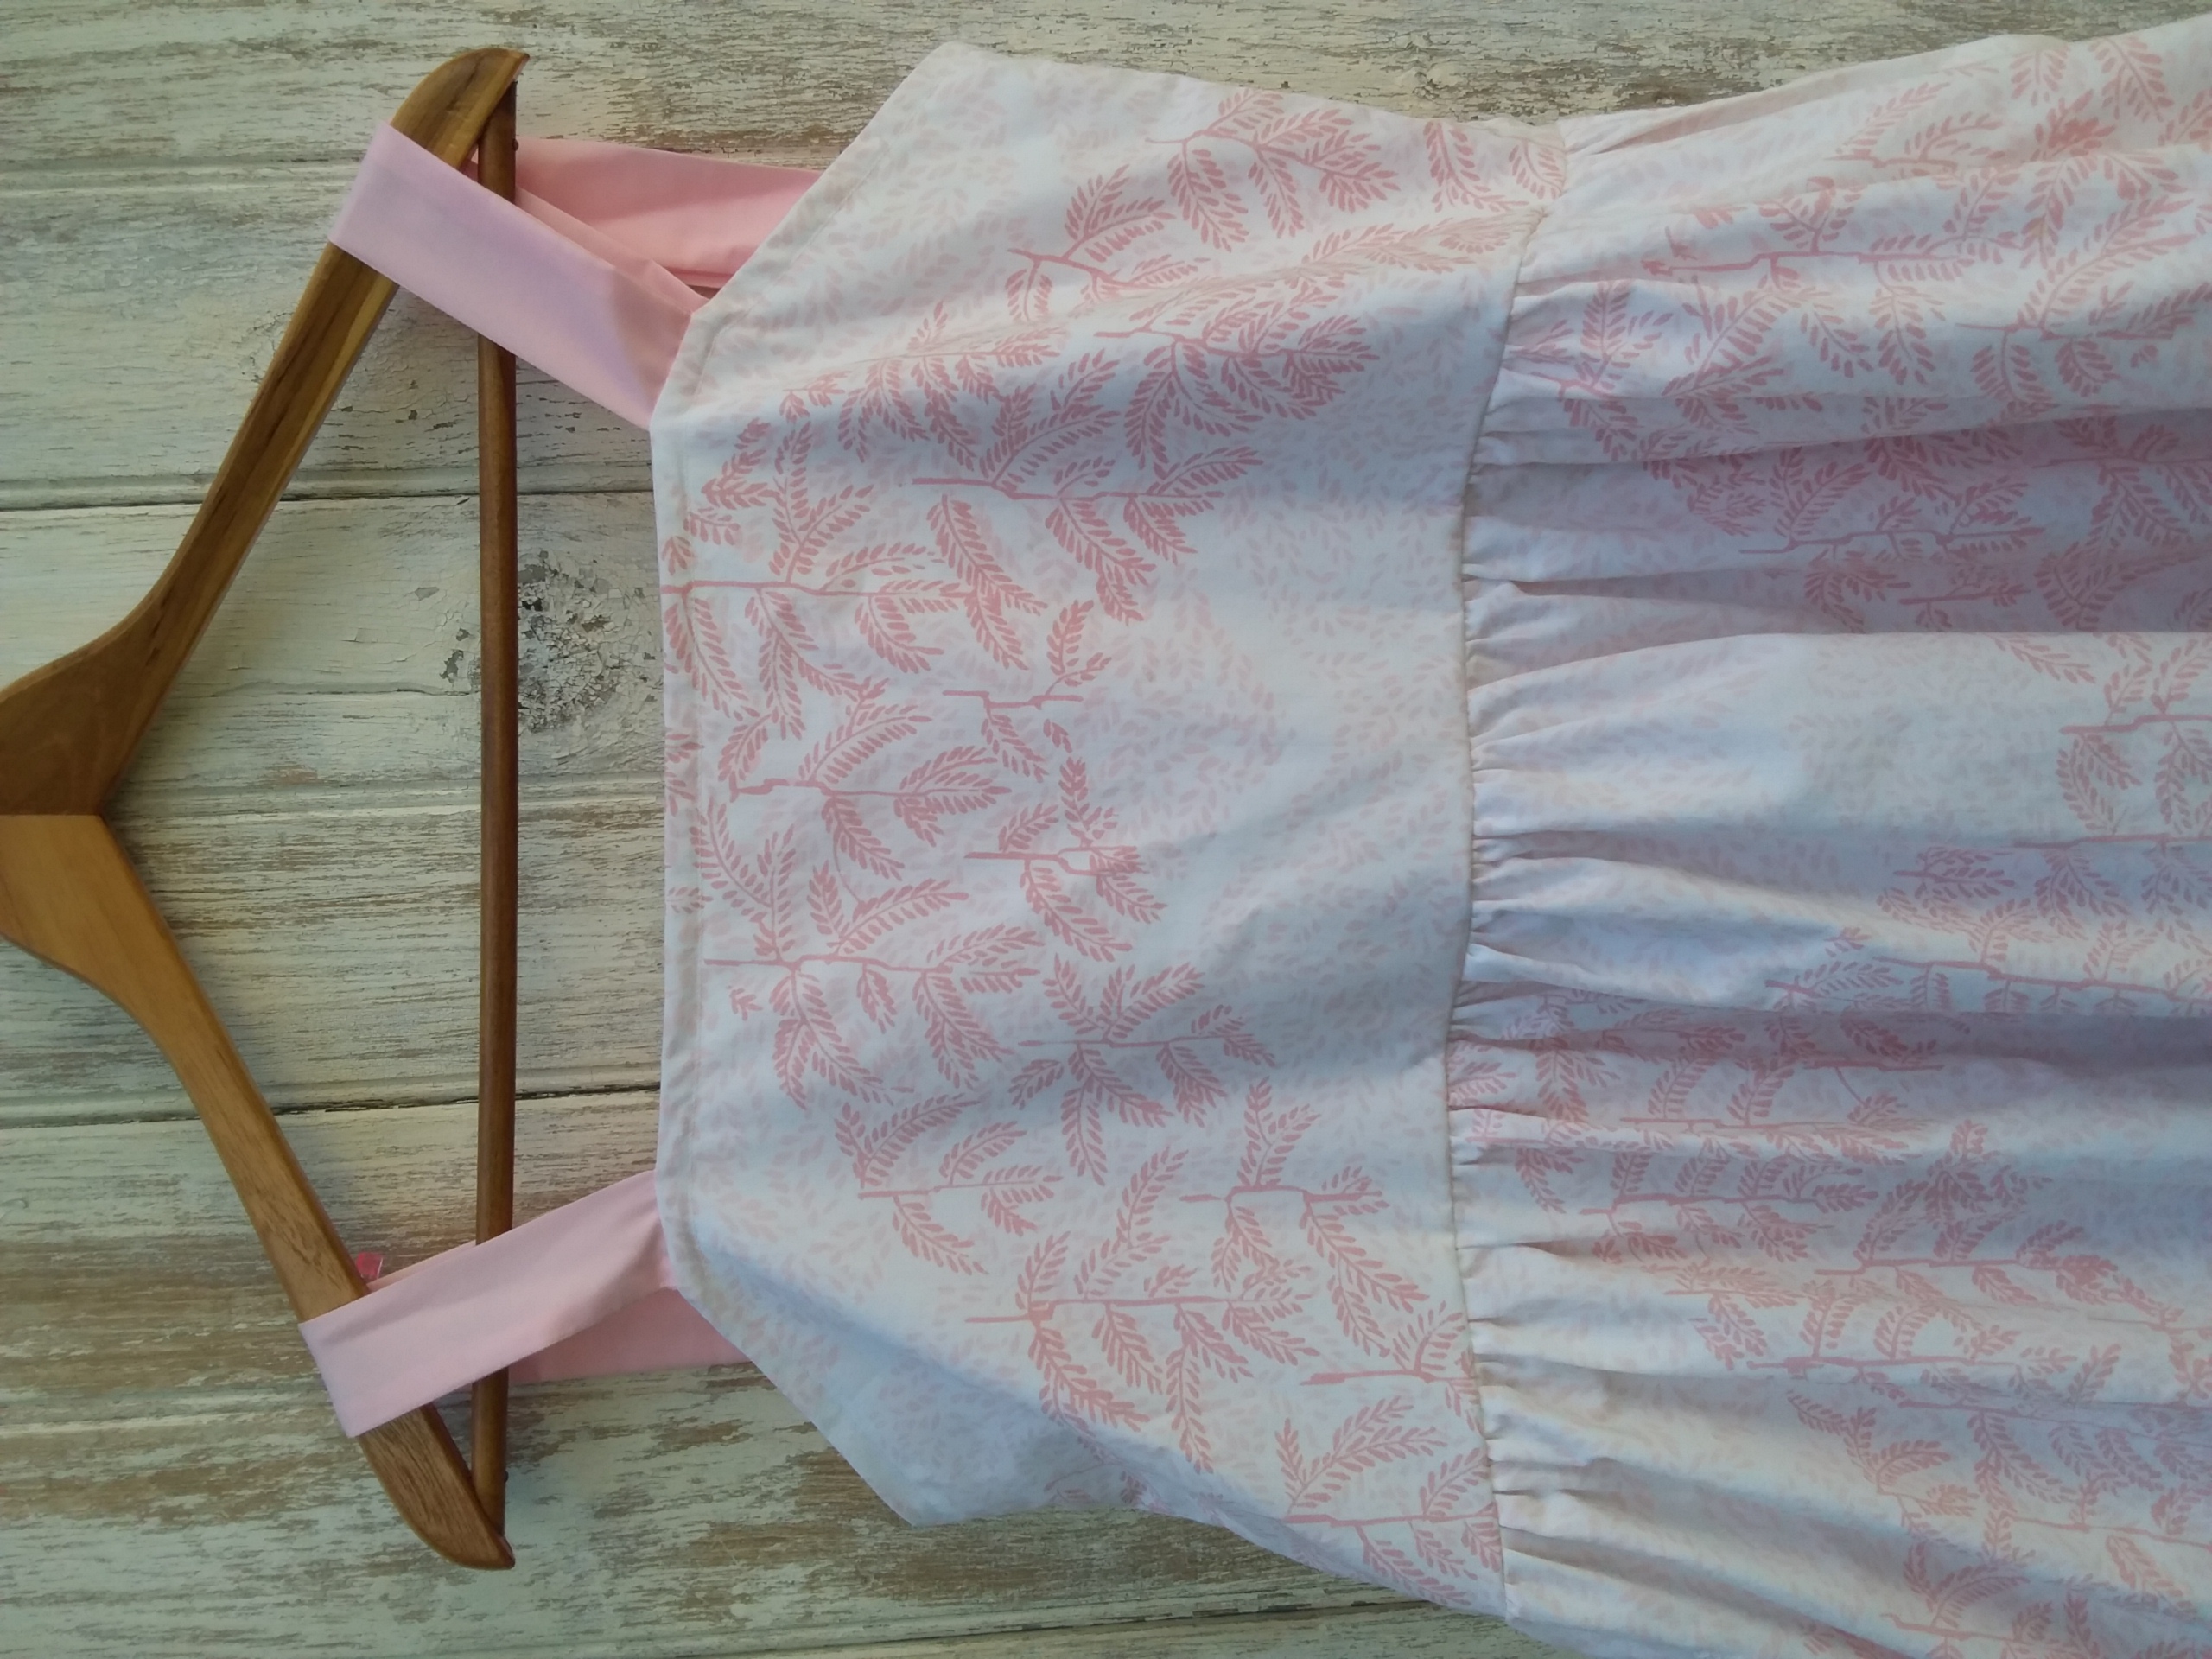 A pink and white dress created from upcycled fabric hanging on a wooden hanger.